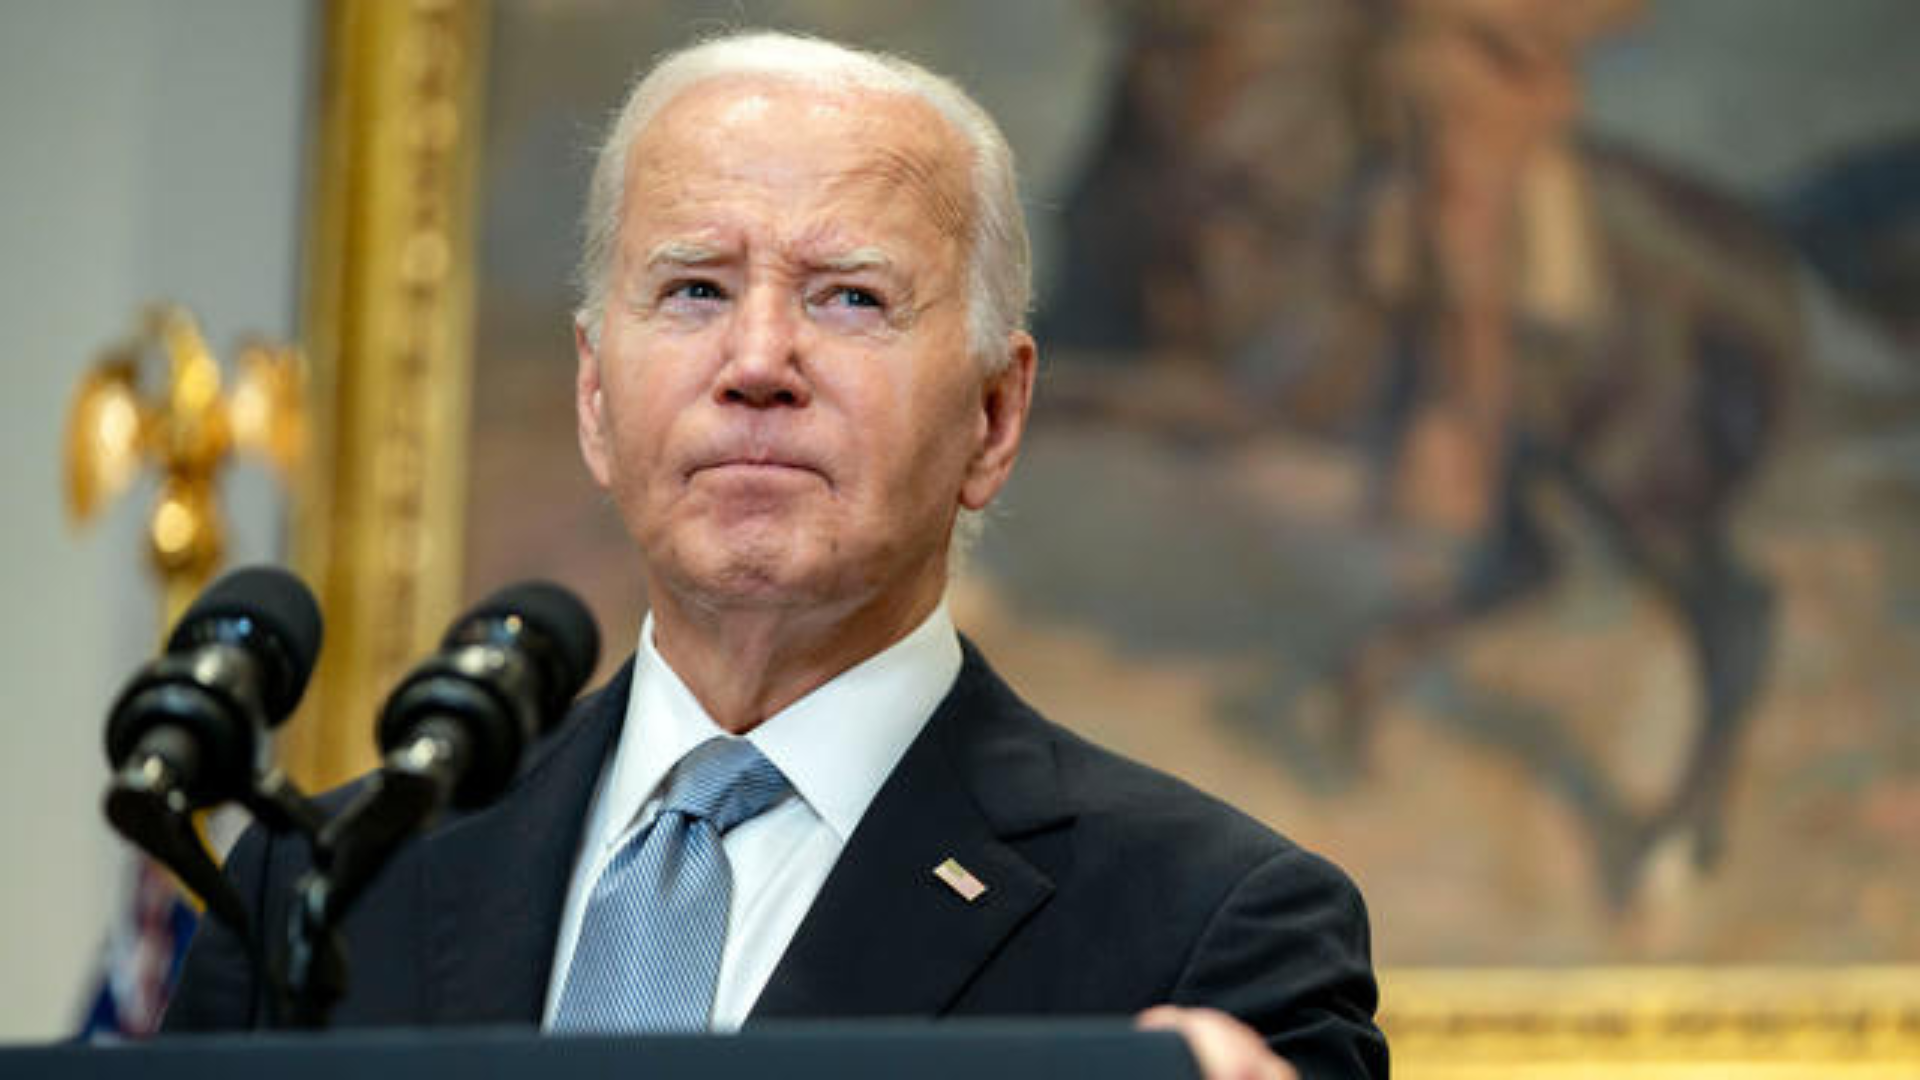 President Biden Drops Out of Presidential Election